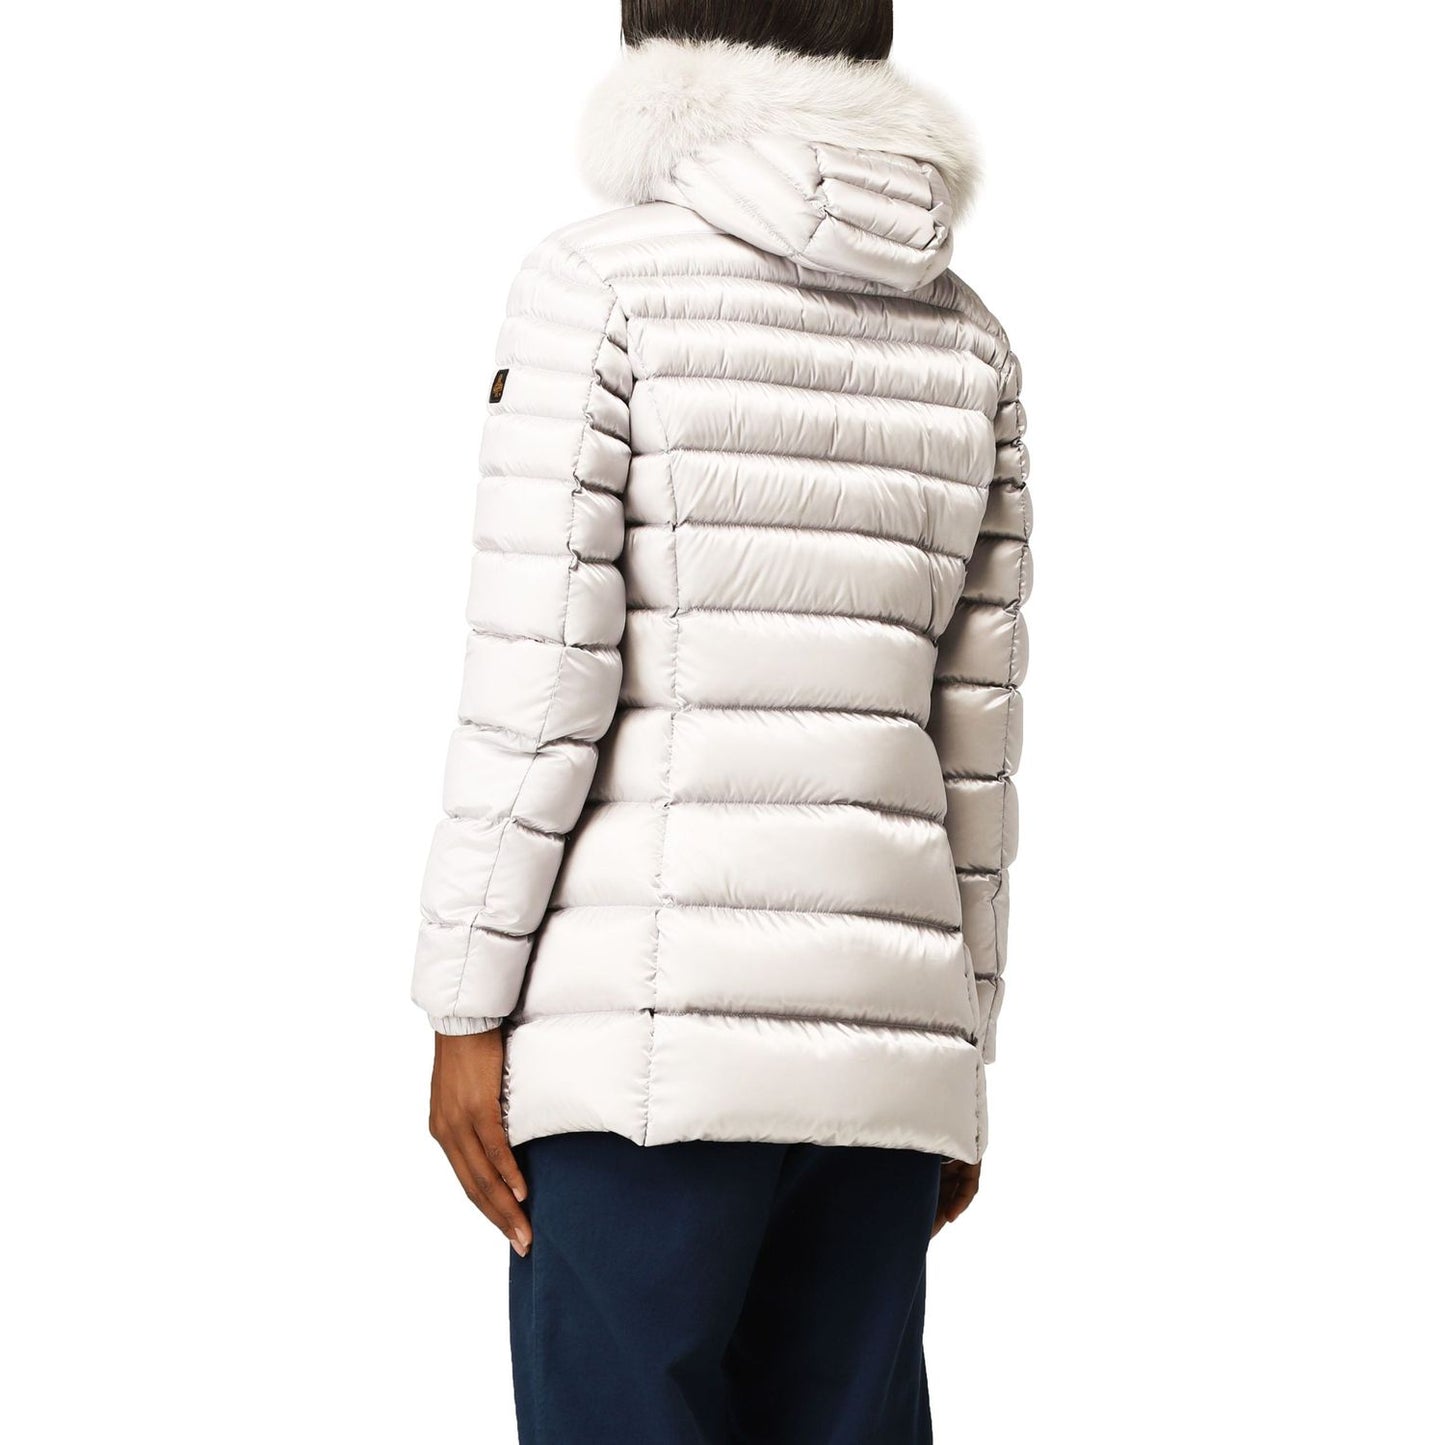 Refrigiwear Chic White Padded Down Jacket with Fur Hood chic-white-padded-down-jacket-with-fur-hood